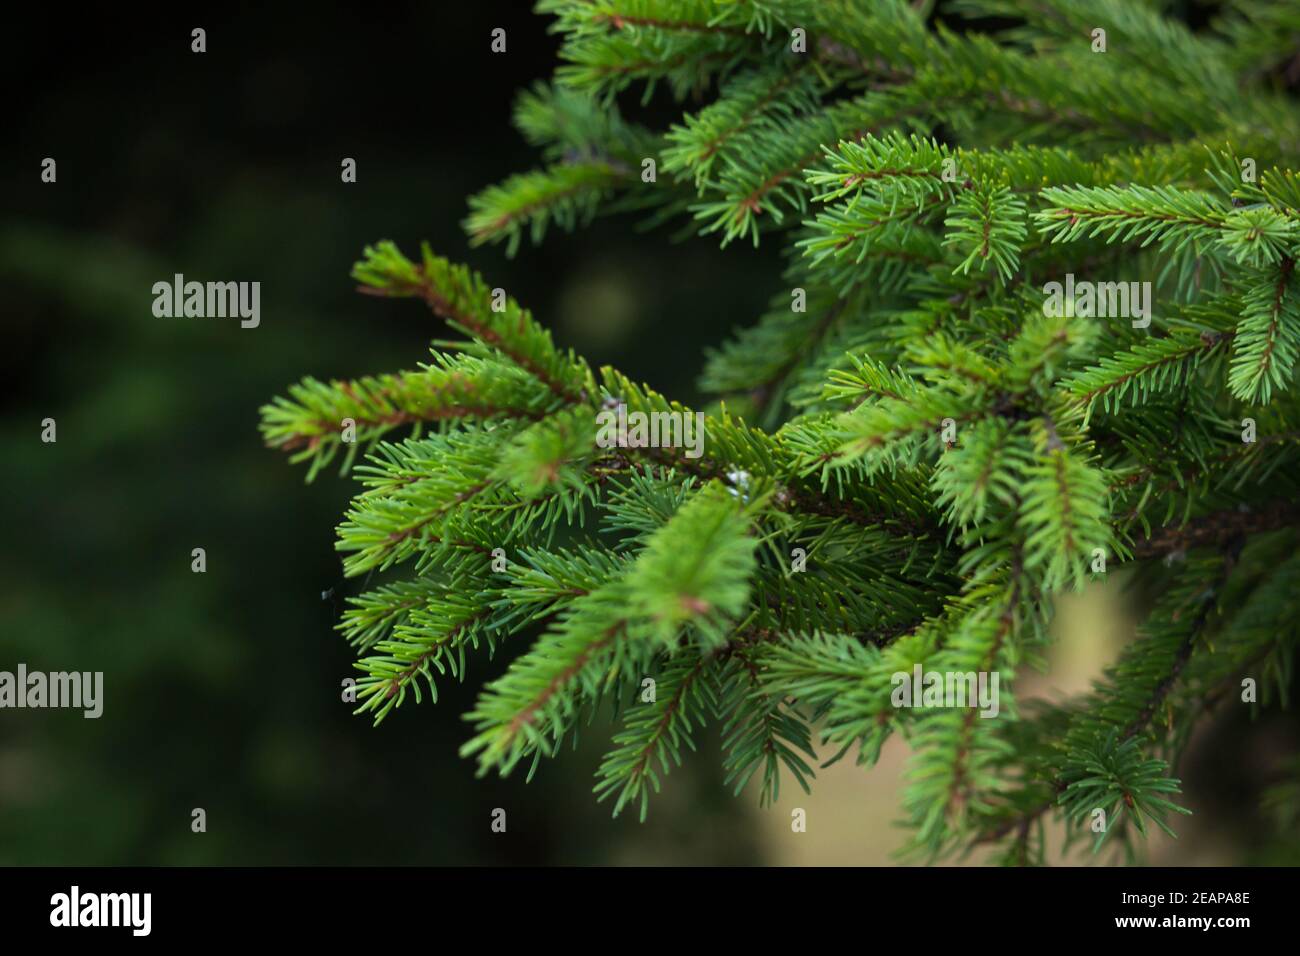 Green prickly branches of a fur-tree or pine. Fluffy fir tree branch close up. background blur Stock Photo